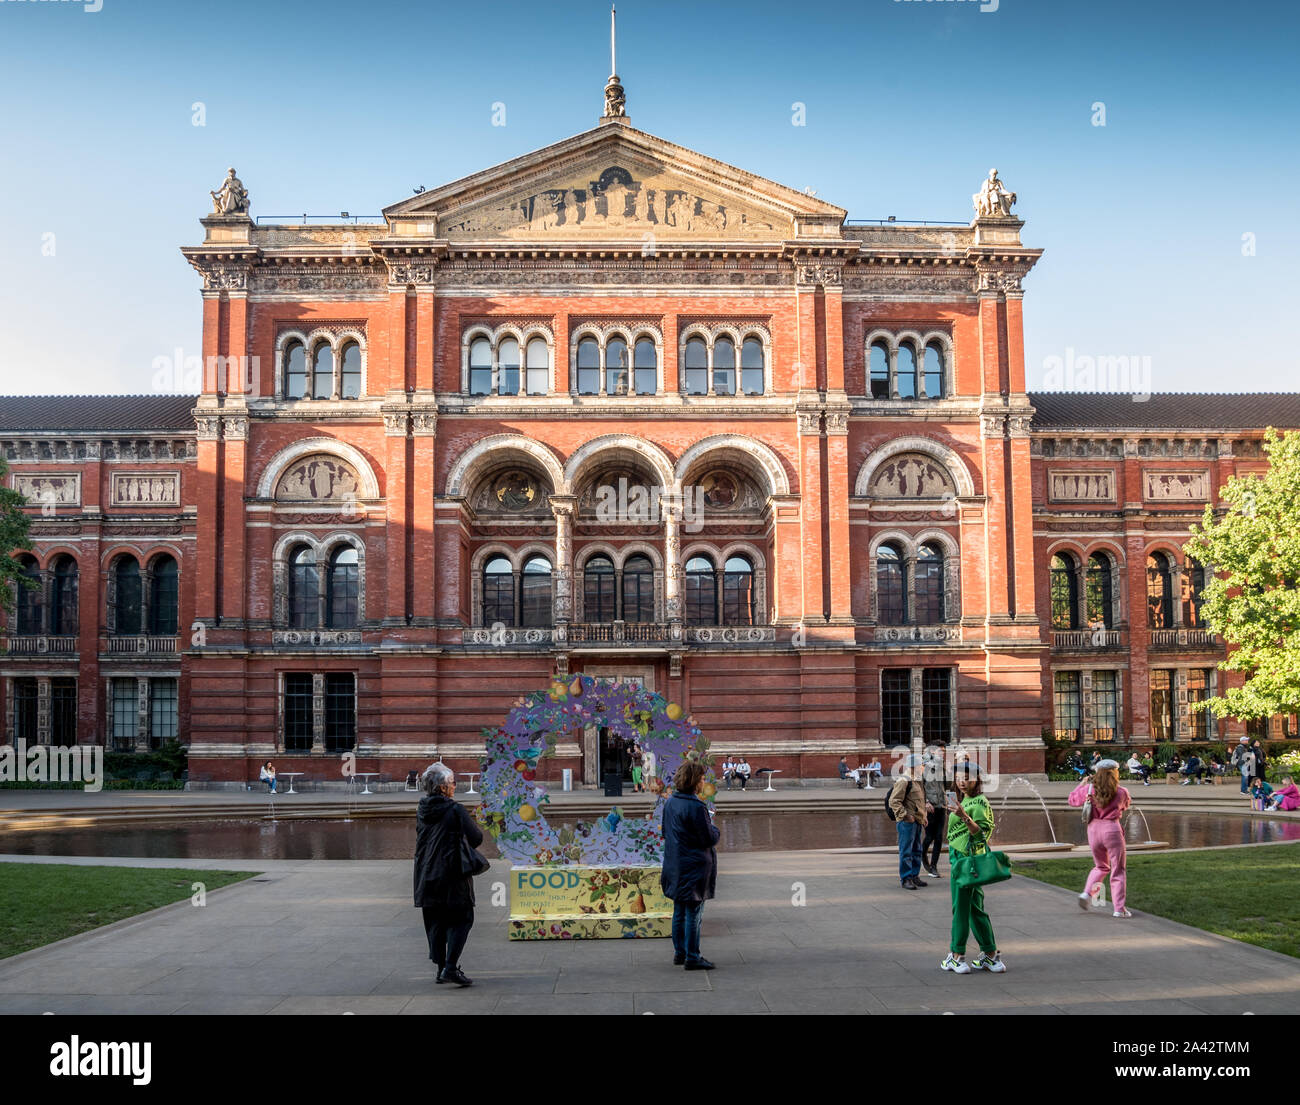 Victoria and Albert (V&A) Museum - Lecture Theatre Block, London, UK Stock Photo